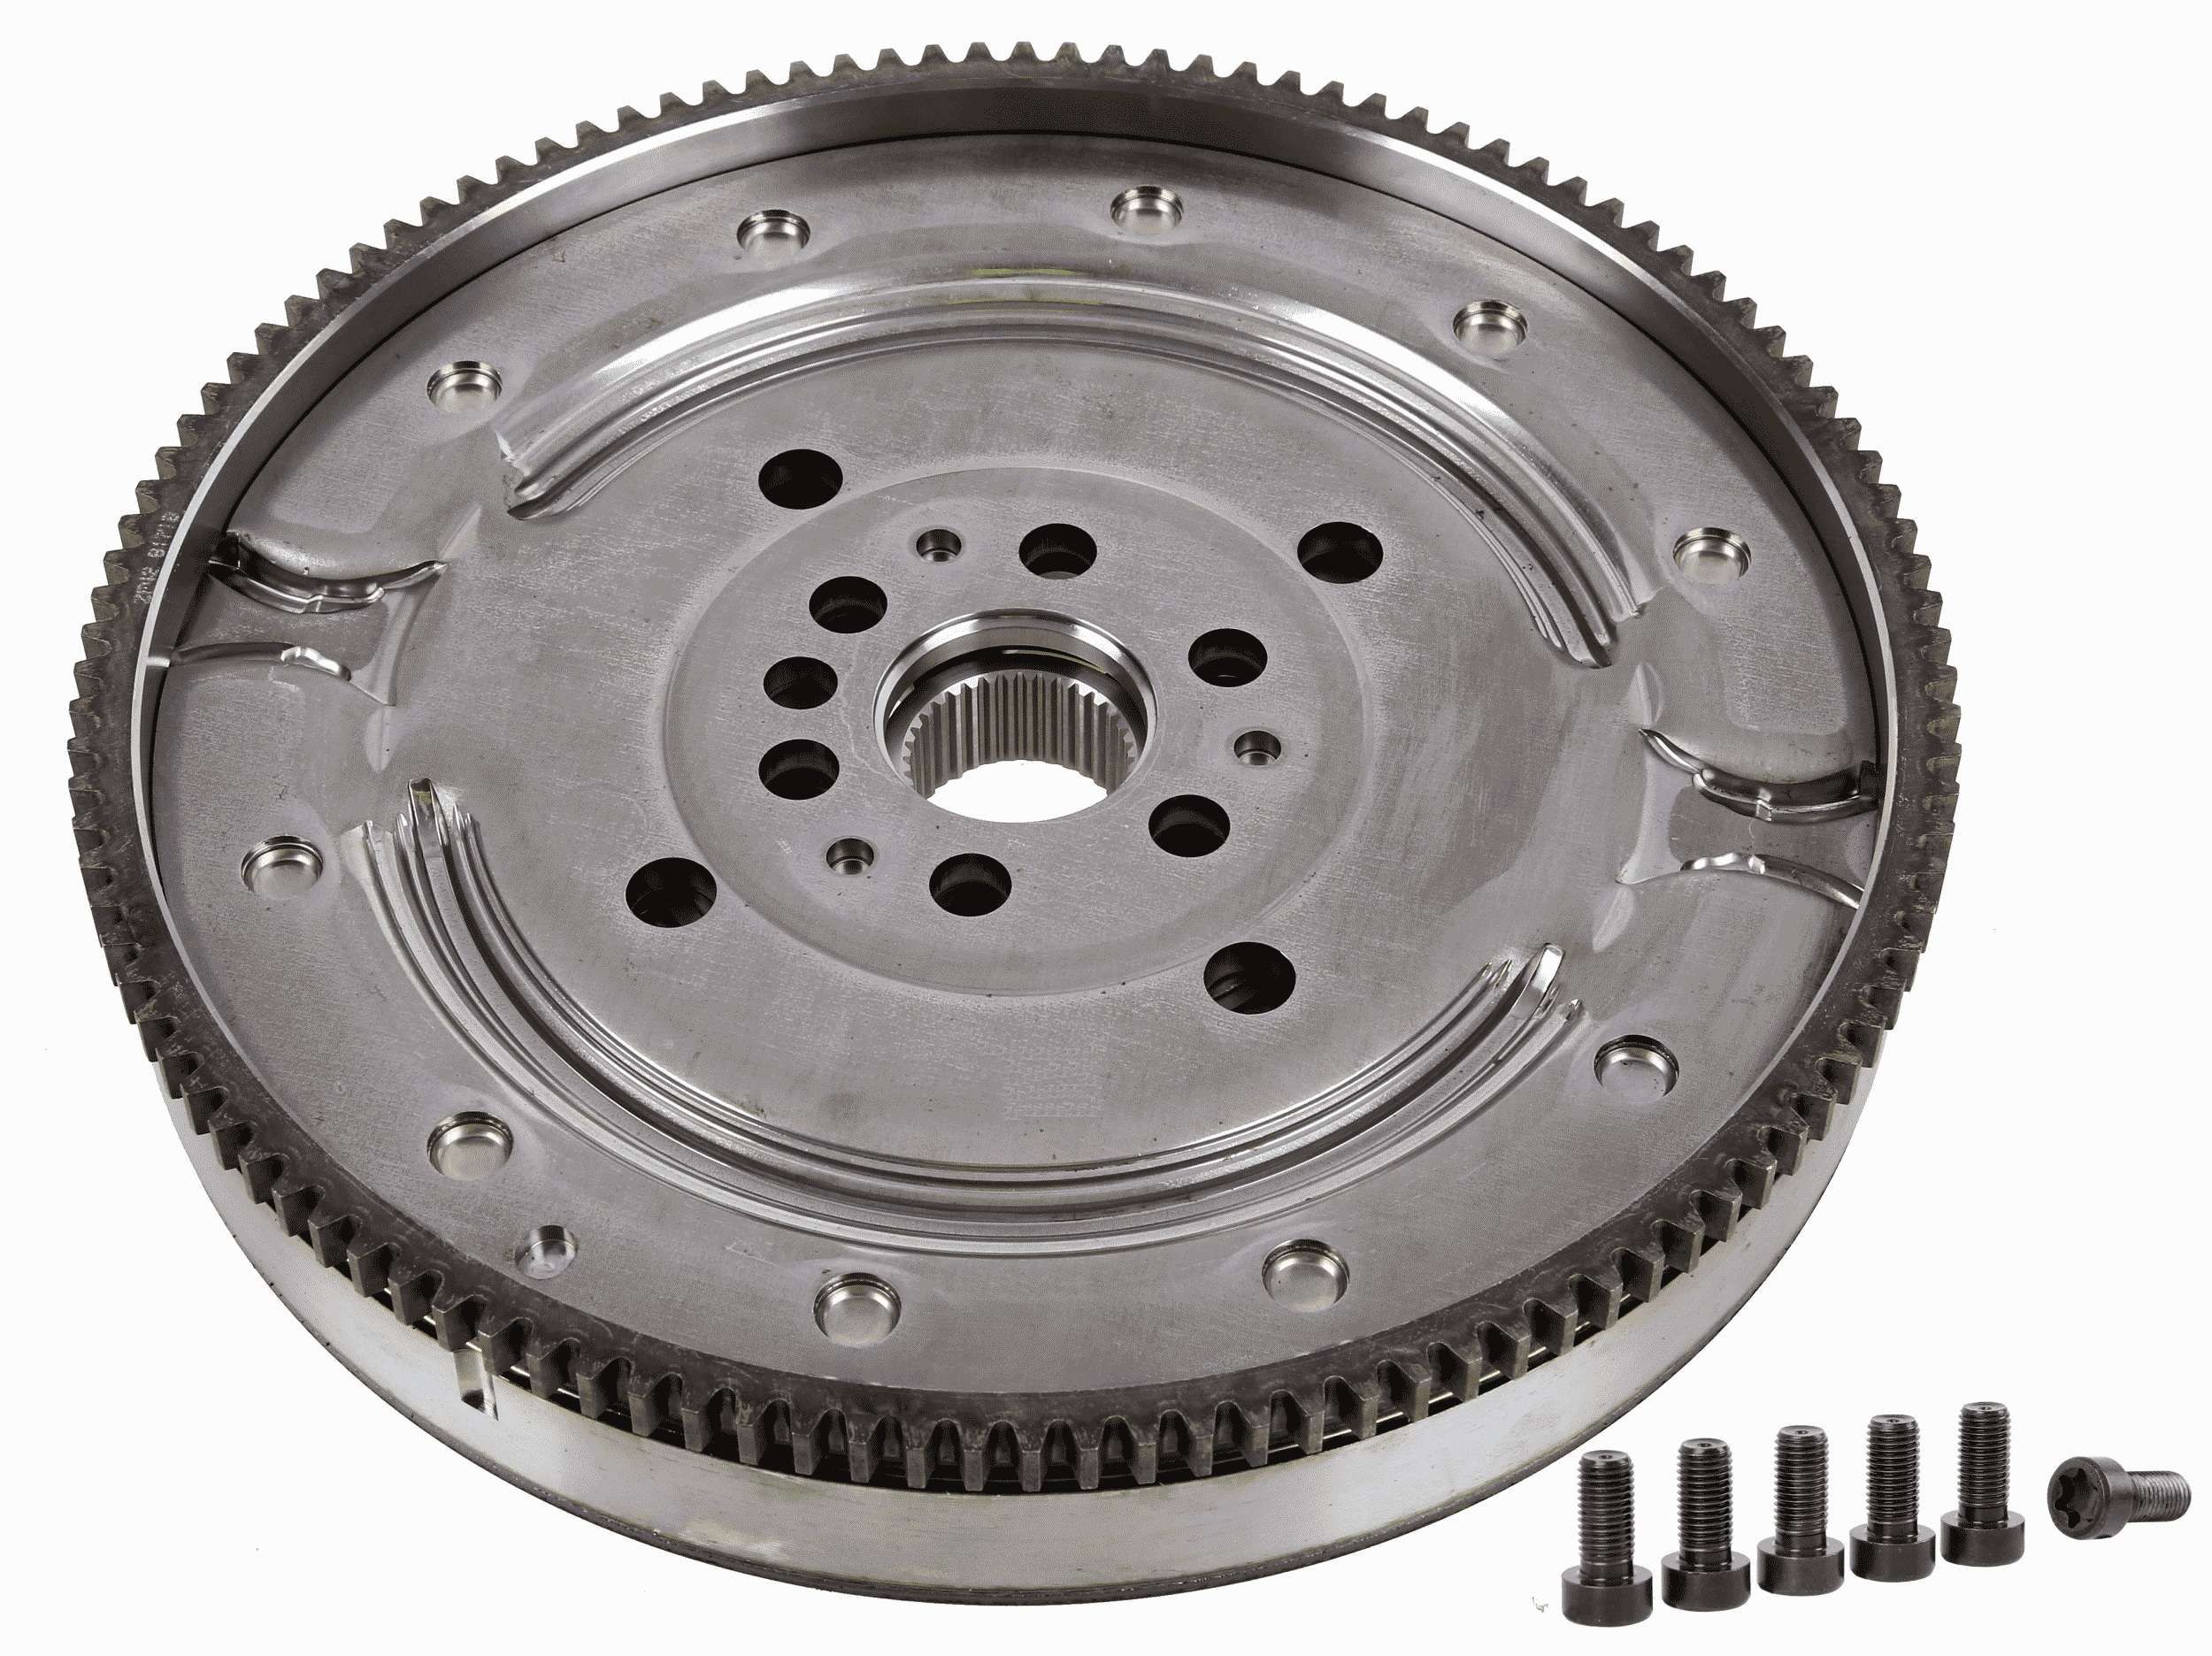 SACHS 2295 002 040 Flywheel BMW experience and price